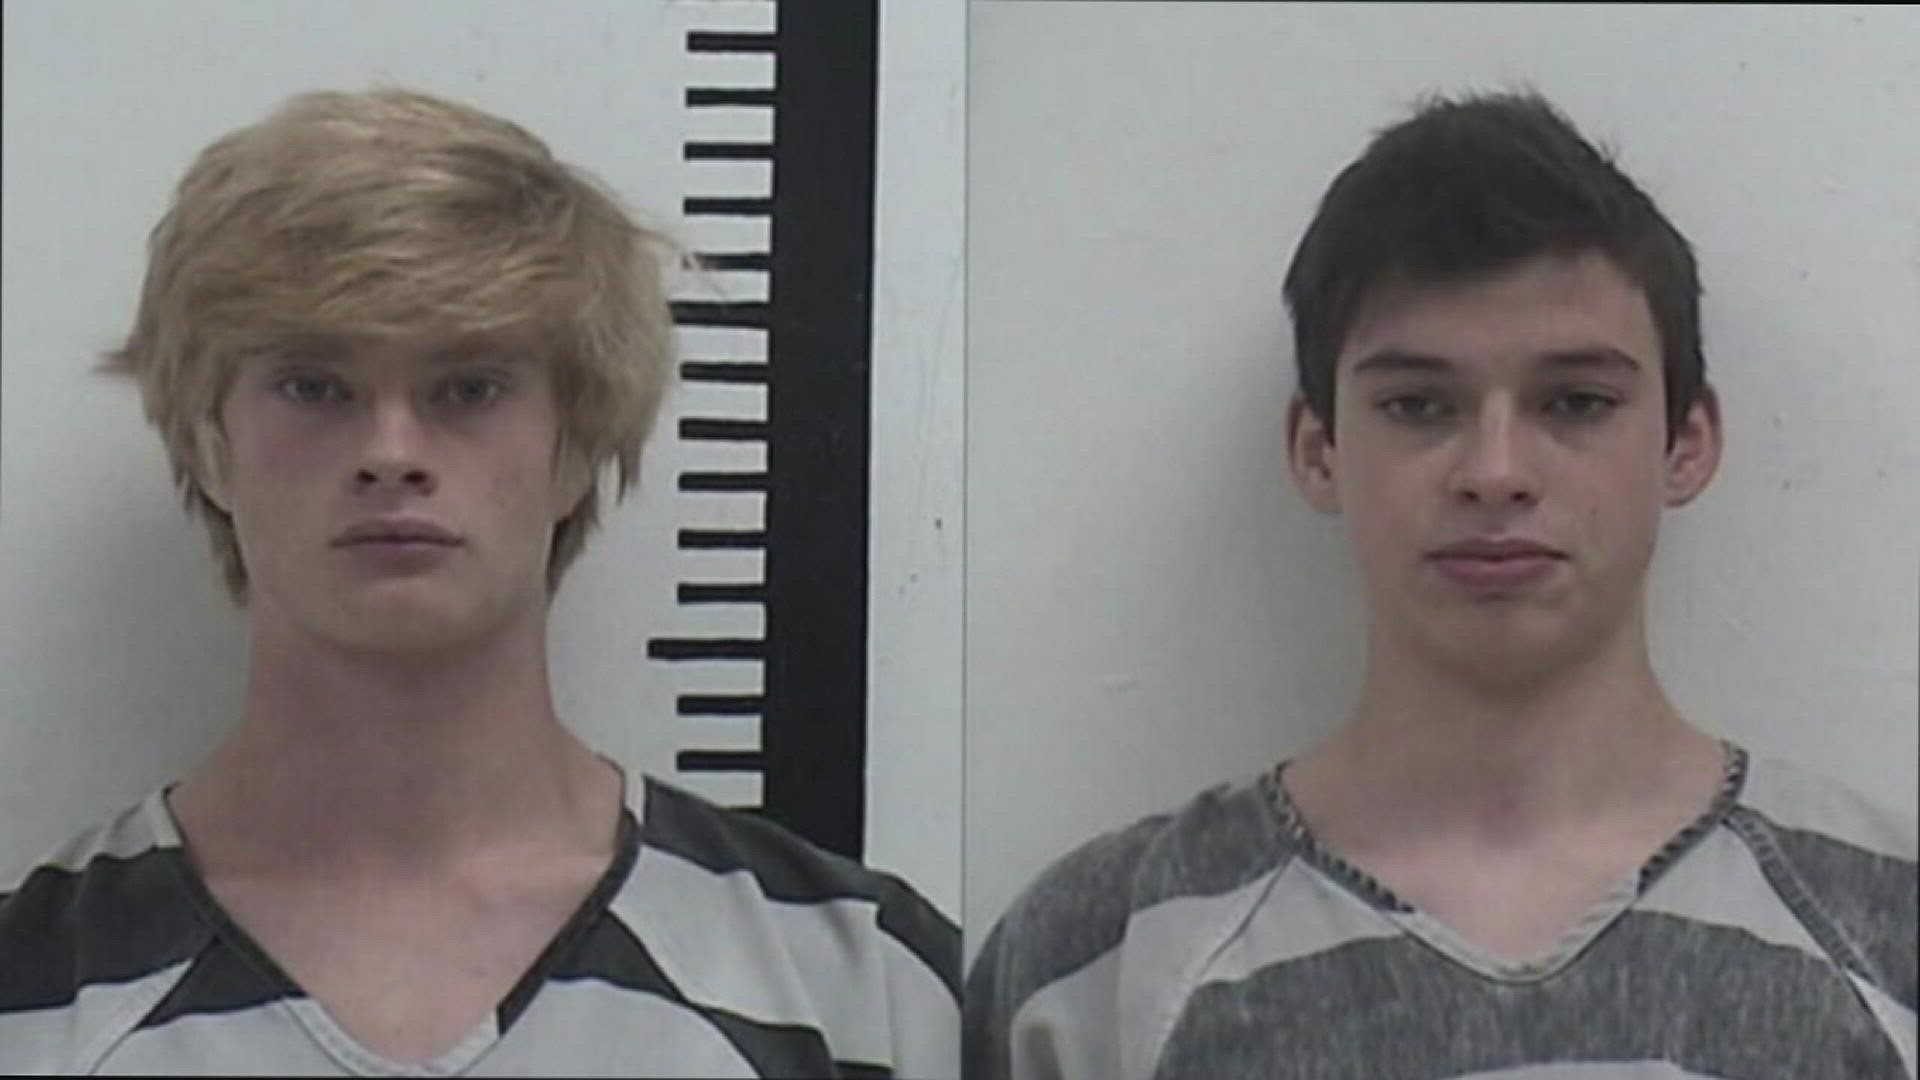 Jeremy Goodale and Willard Miller, both 16-years-old, are charged with the murder of their former Spanish teacher, and are to appear in a public hearing on Thursday.